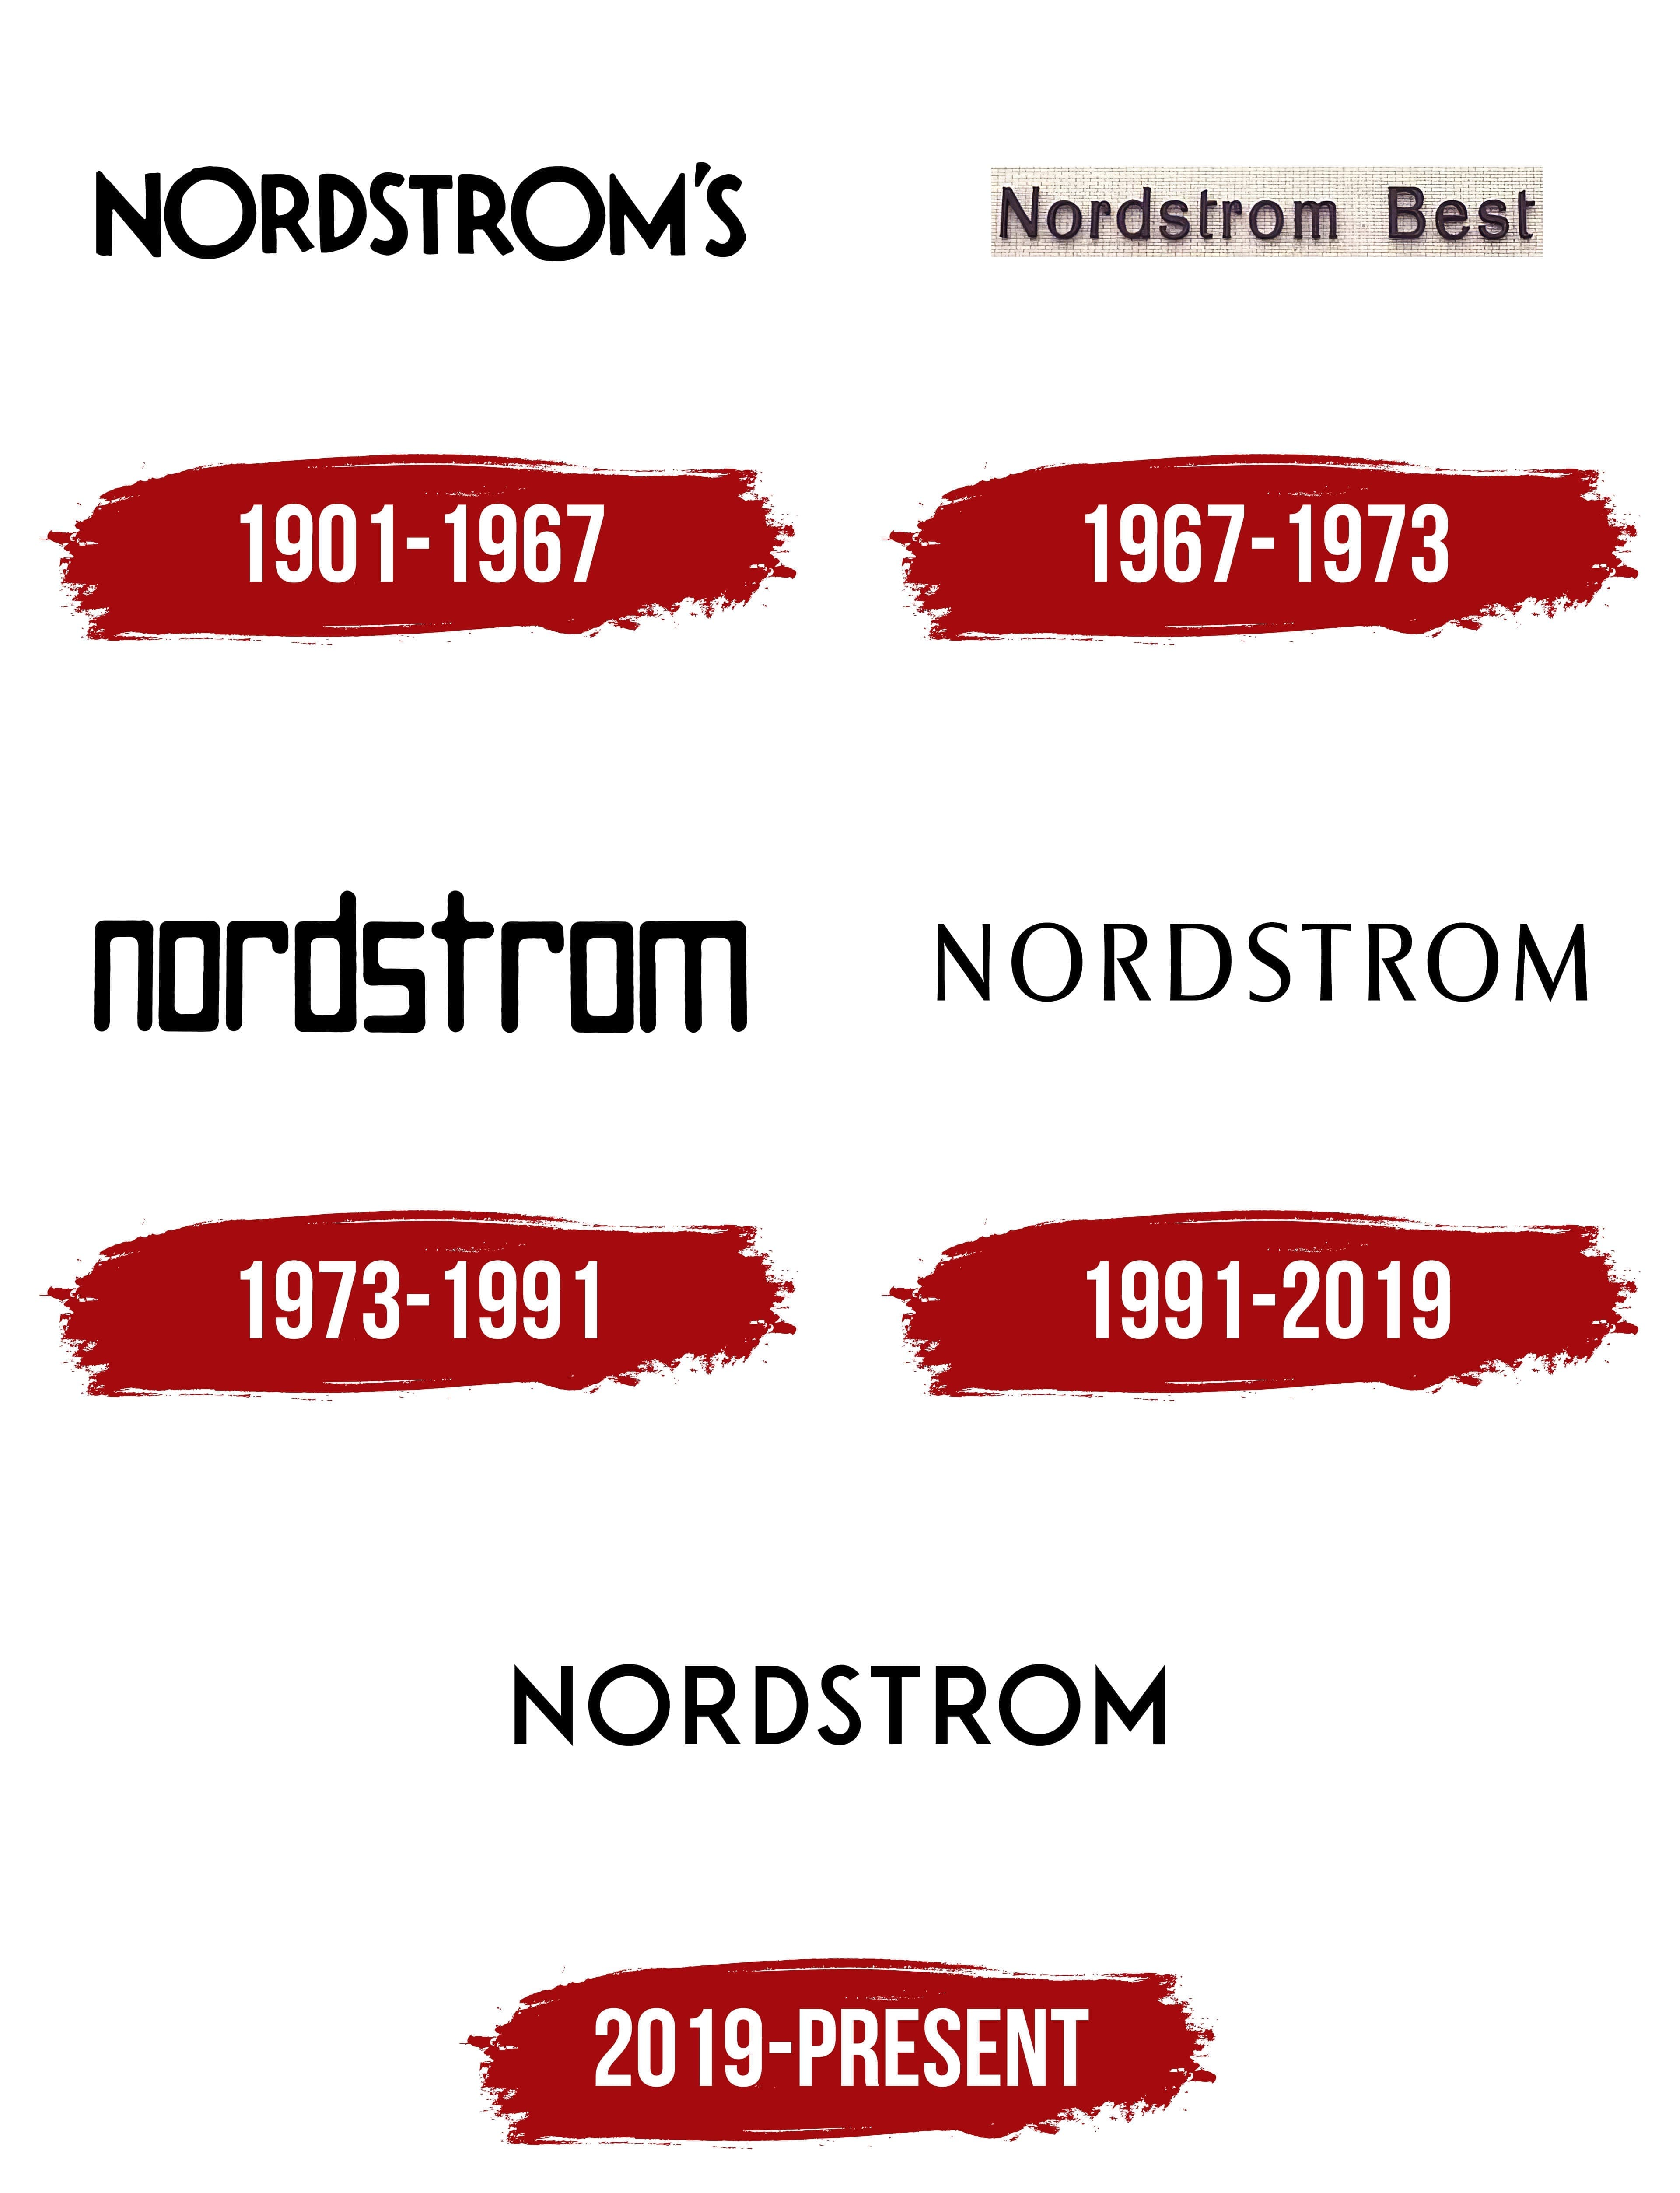 Why Nordstrom Rack Changed Its Logo?